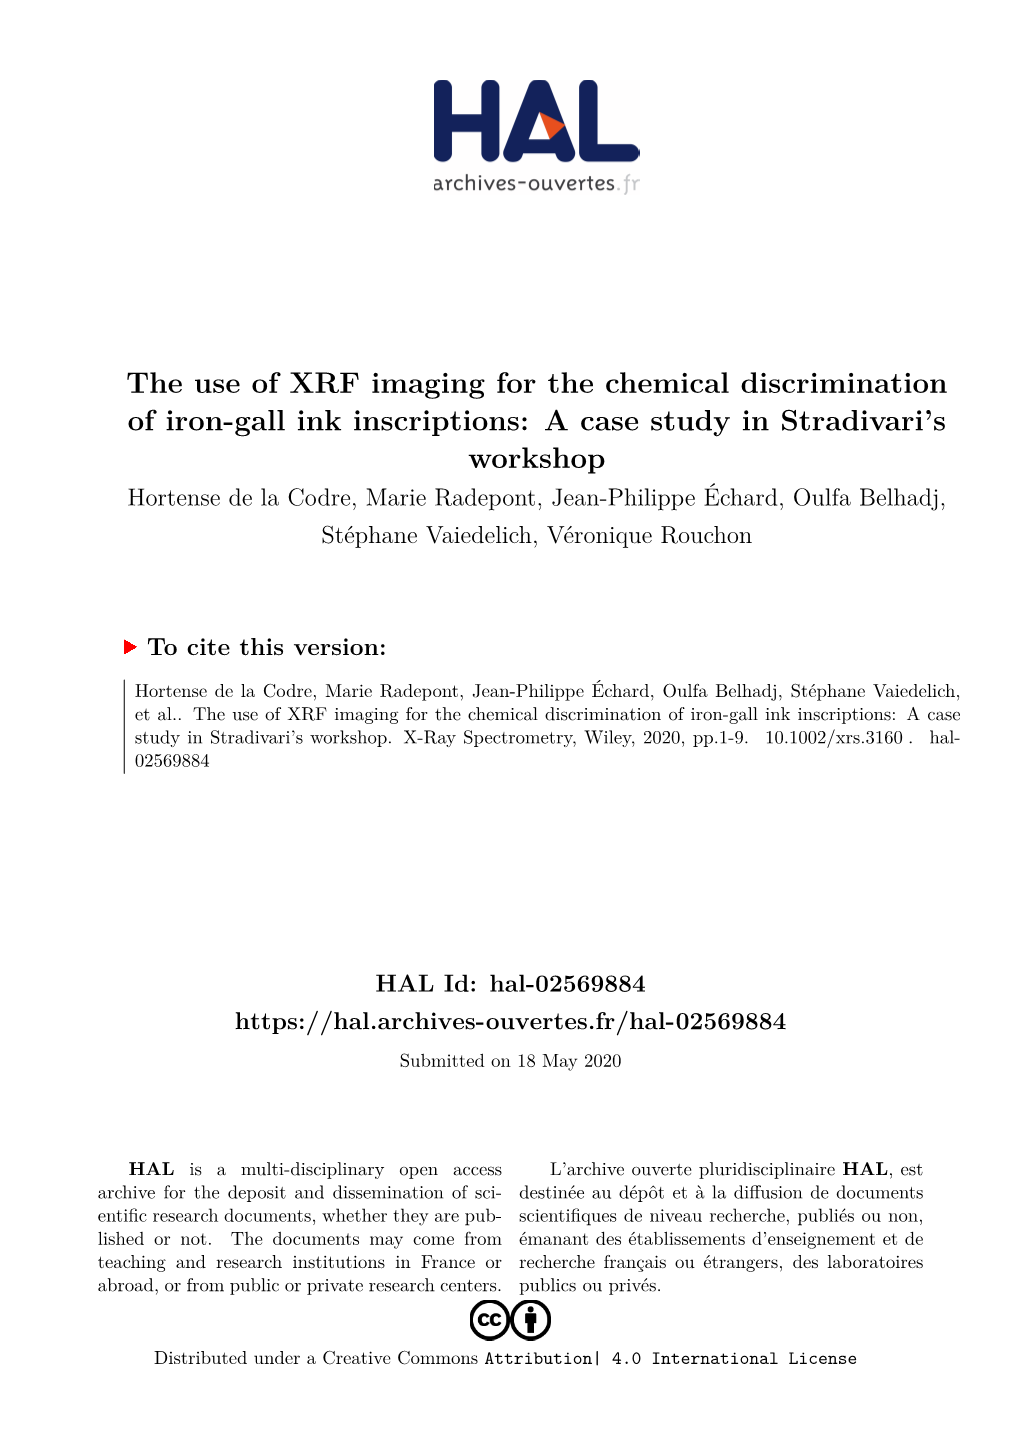 The Use of XRF Imaging for the Chemical Discrimination of Iron-Gall